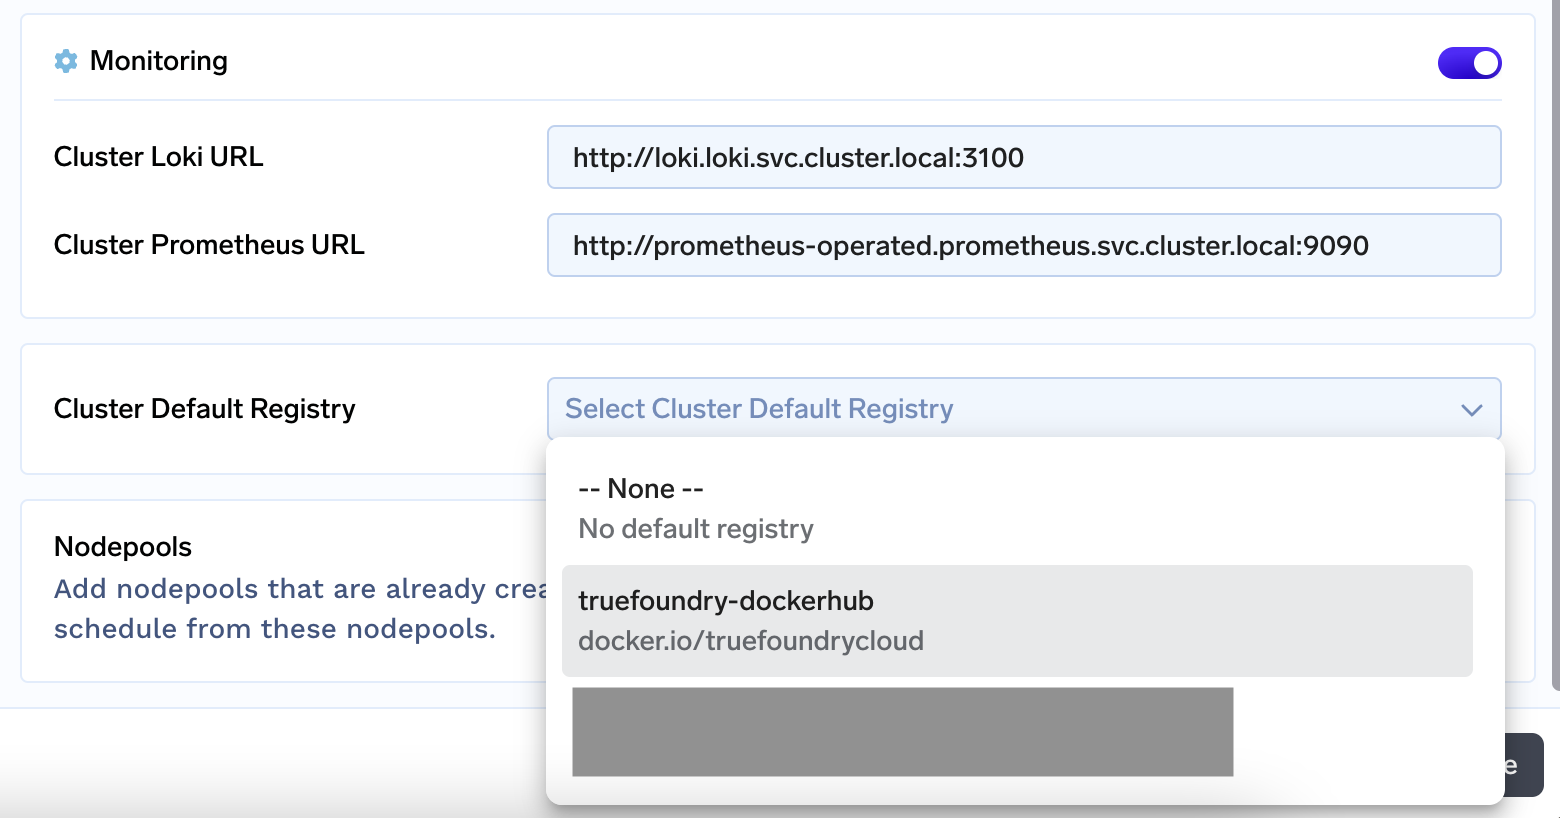 Choose a default registry for the cluster from the form